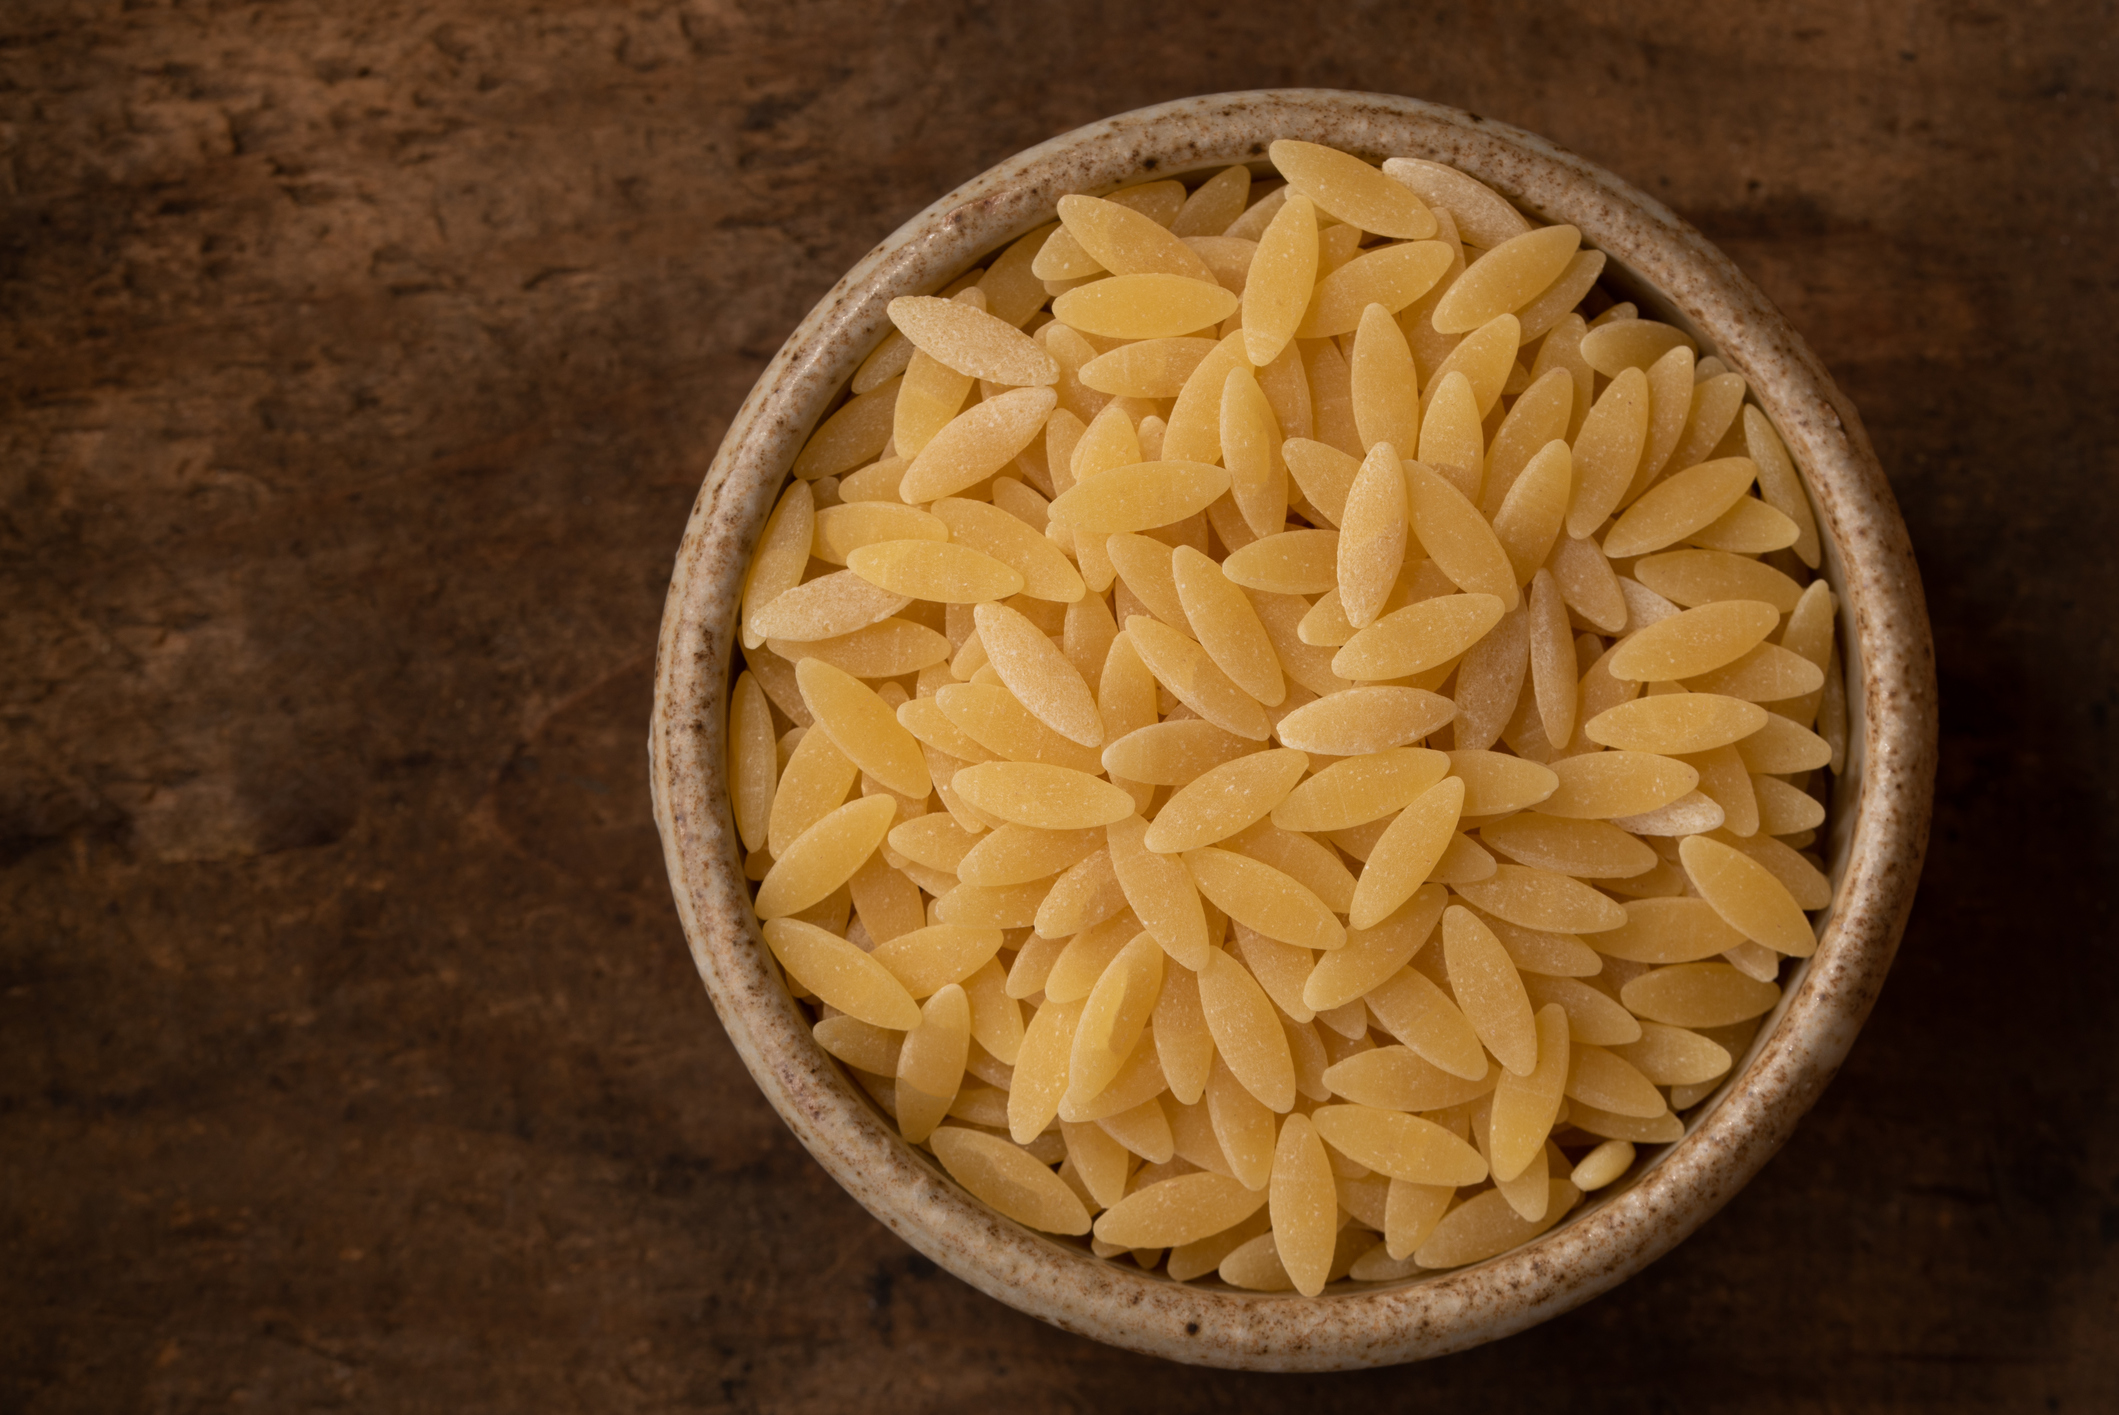 Uncooked Orzo Pasta in a Bowl